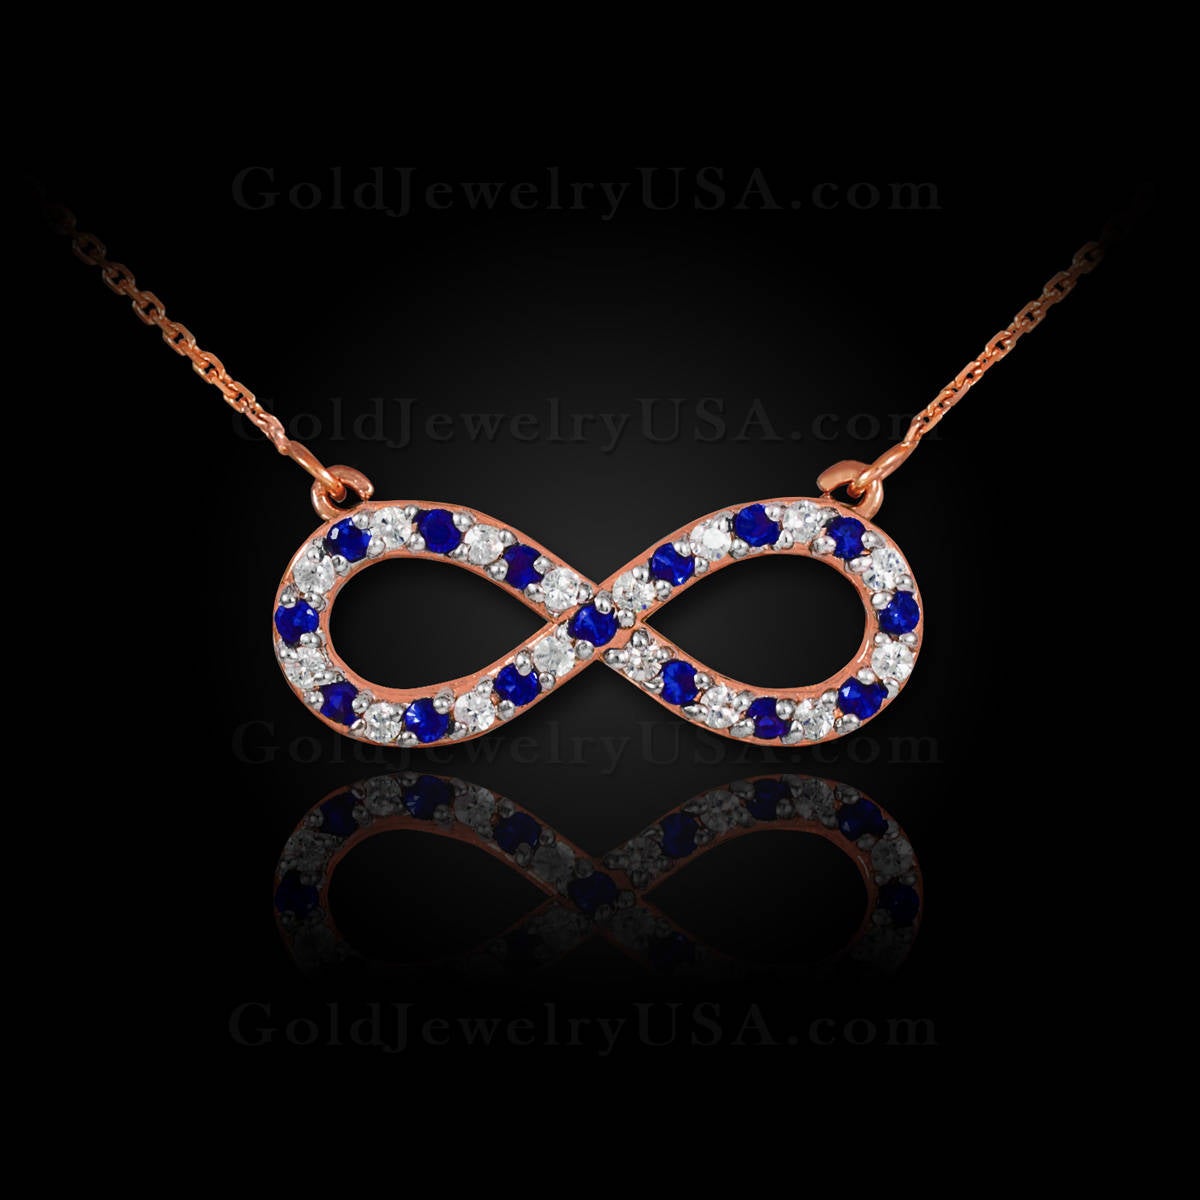 14K Gold Diamond and Sapphire Infinity Necklace (yellow, white, rose gold) Karma Blingz